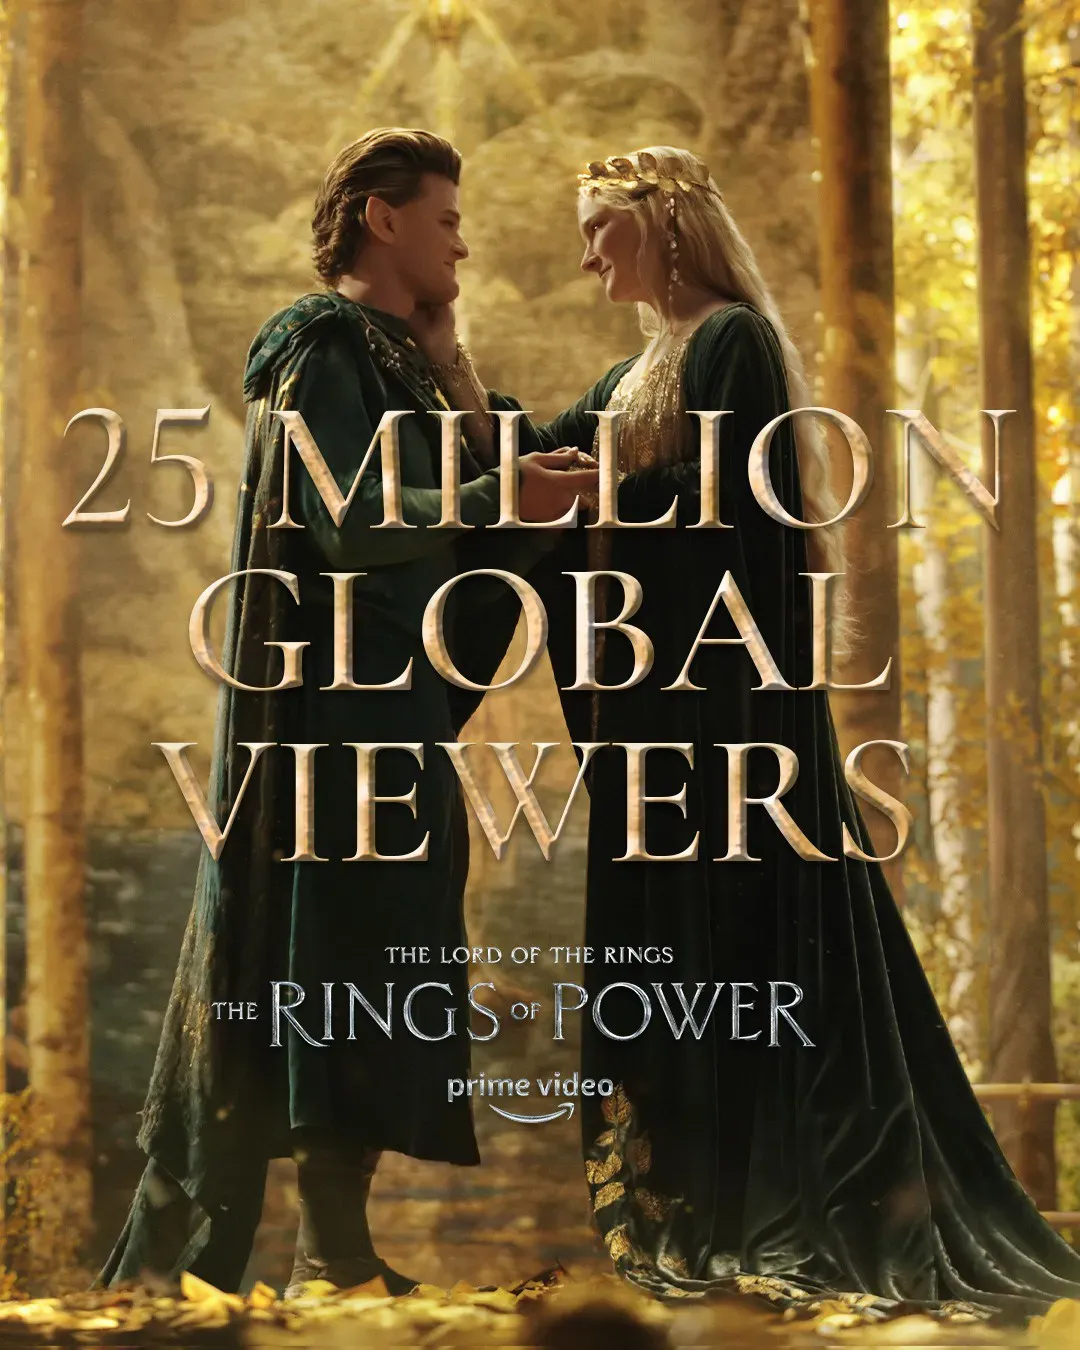 'The Lord of the Rings: The Rings of Power' breaks Amazon record with over 25 million views on first day | FMV6